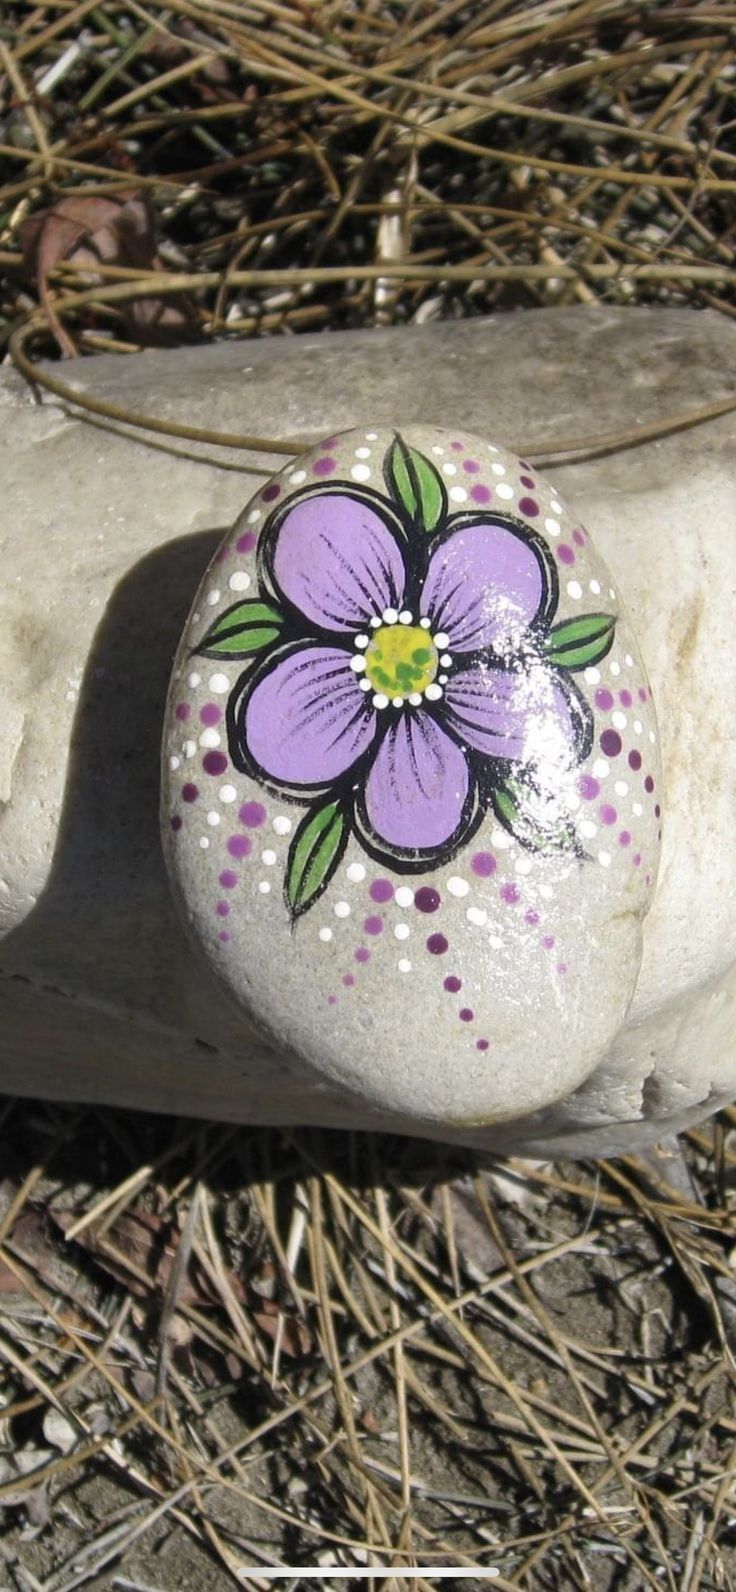 Rock Painting Flowers: A Creative Way to Add Color to Your Garden